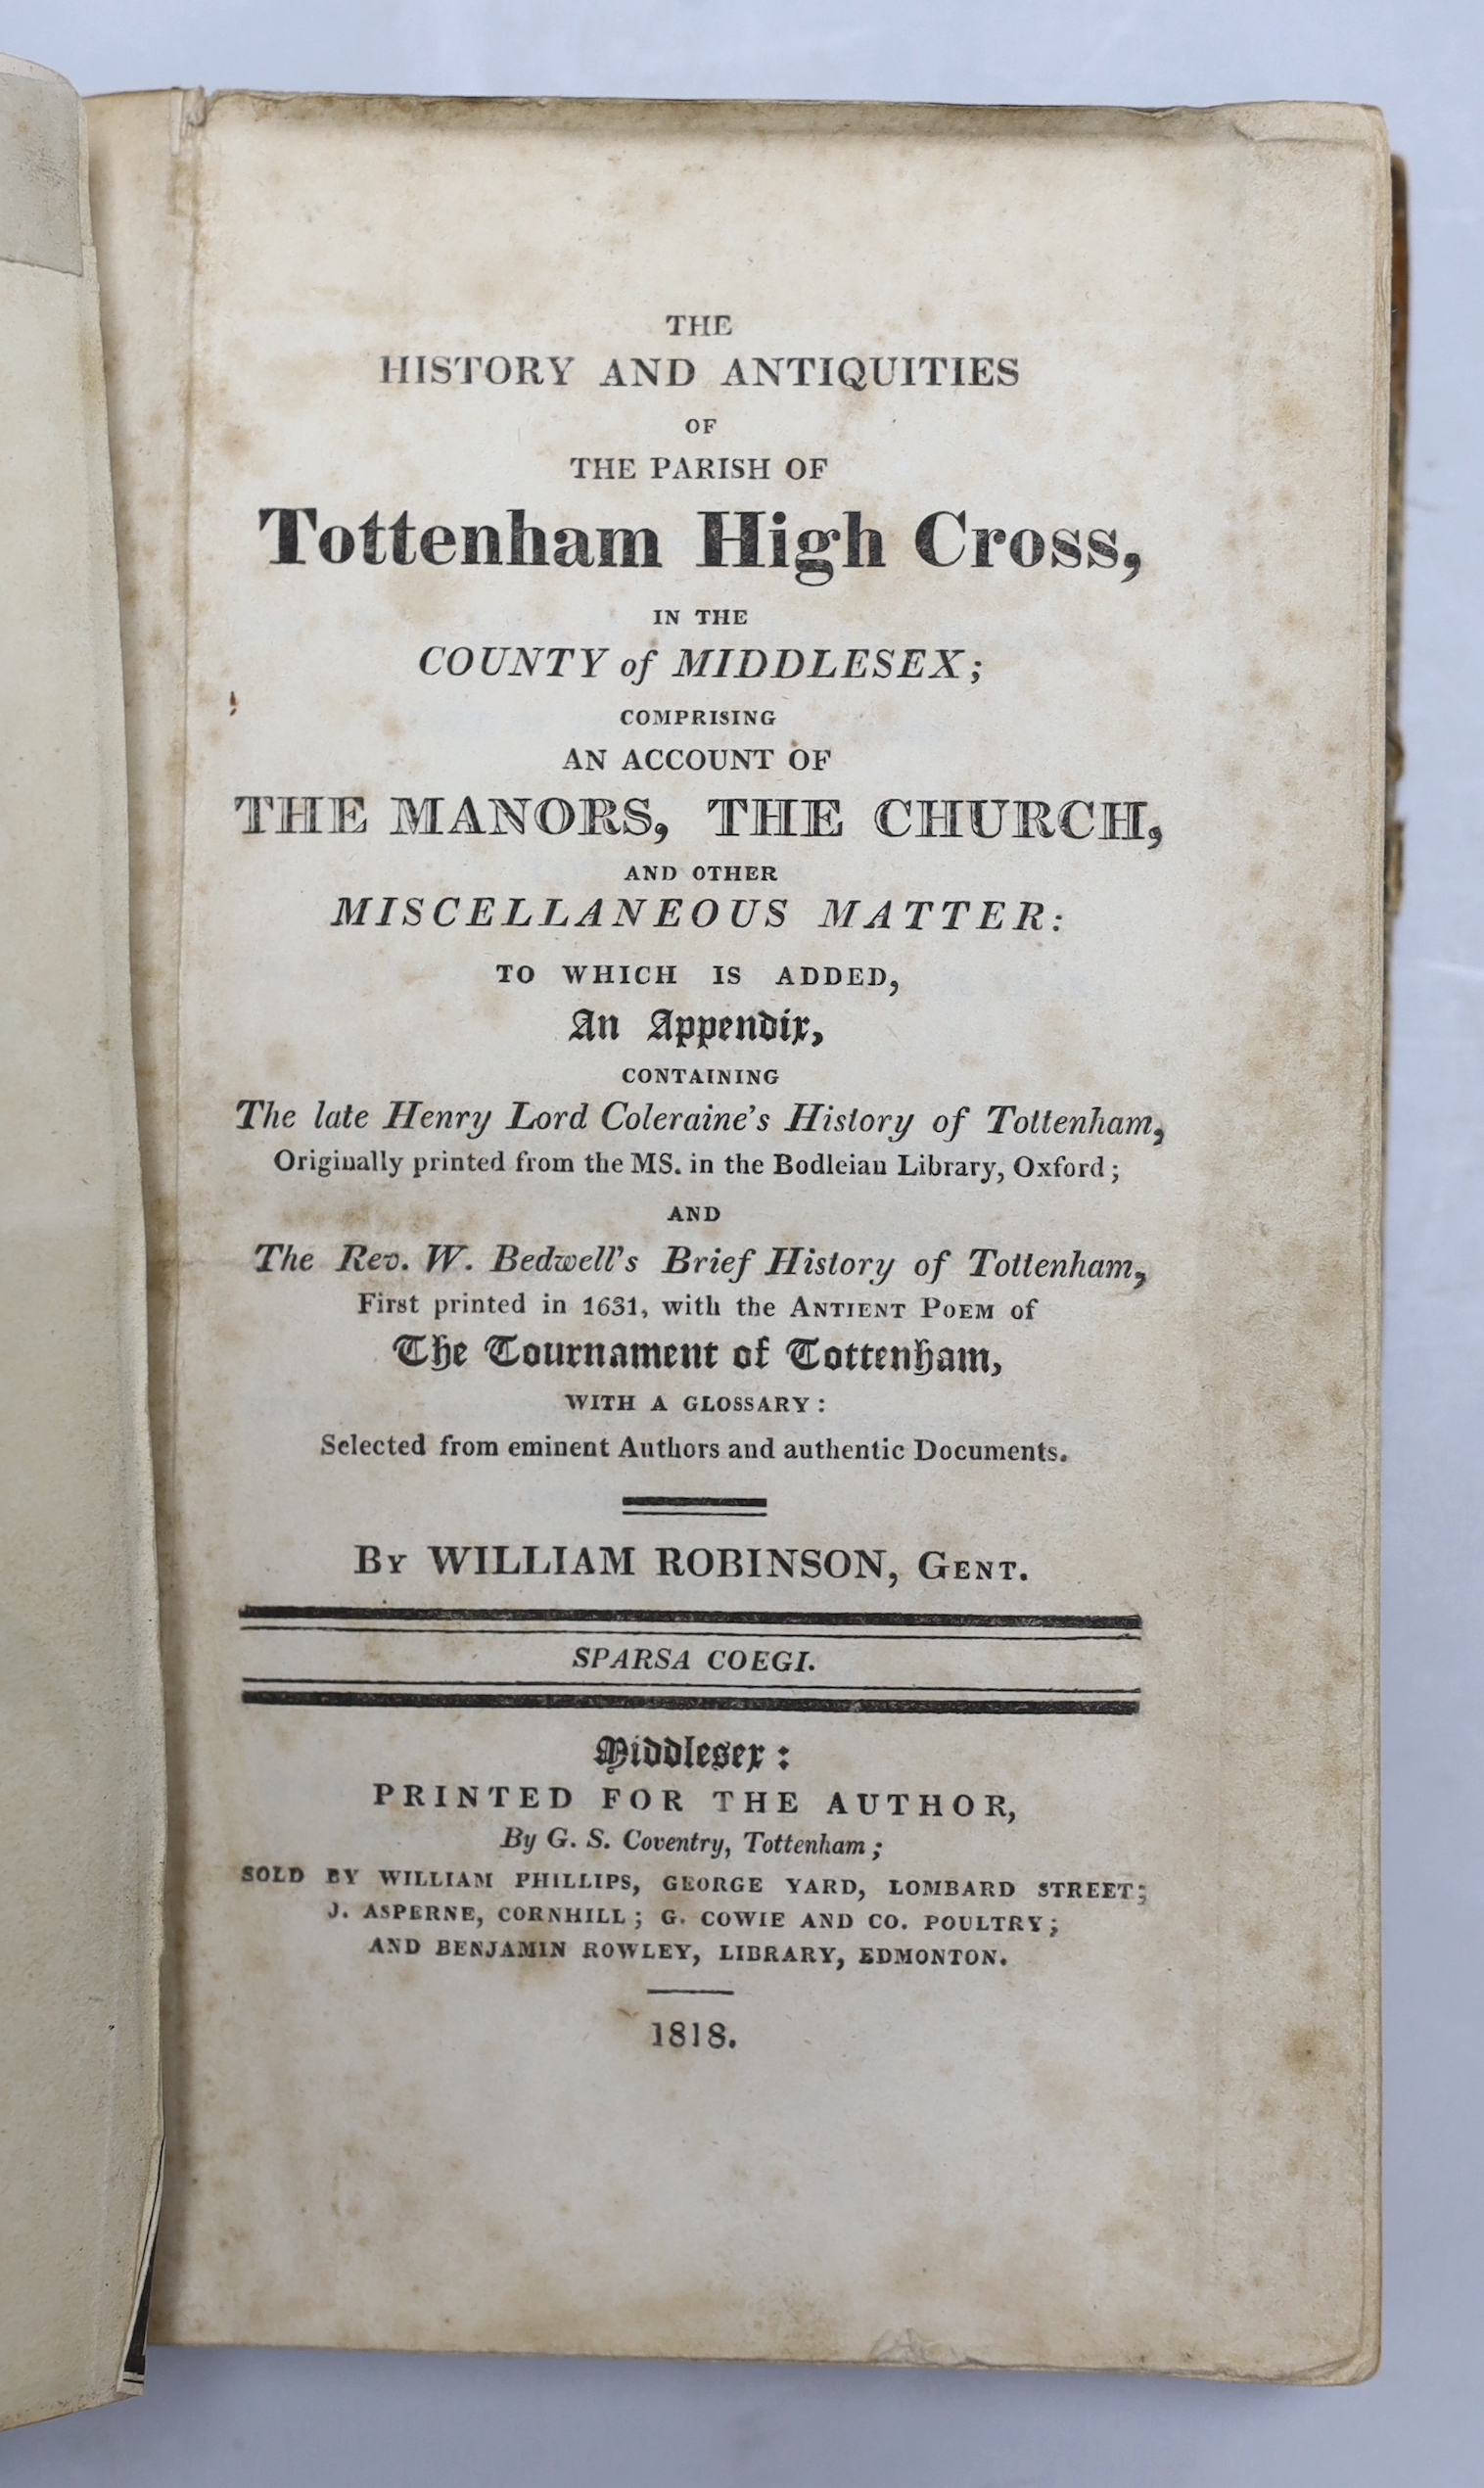 LONDON: Nelson, John. The History, Topography, and Antiquities of the Parish of St. Mary Islington, in the County of Middlesex, 12 engraved plates, 1 folding survey of roads and footpaths, 7pp. index to rear, near contem